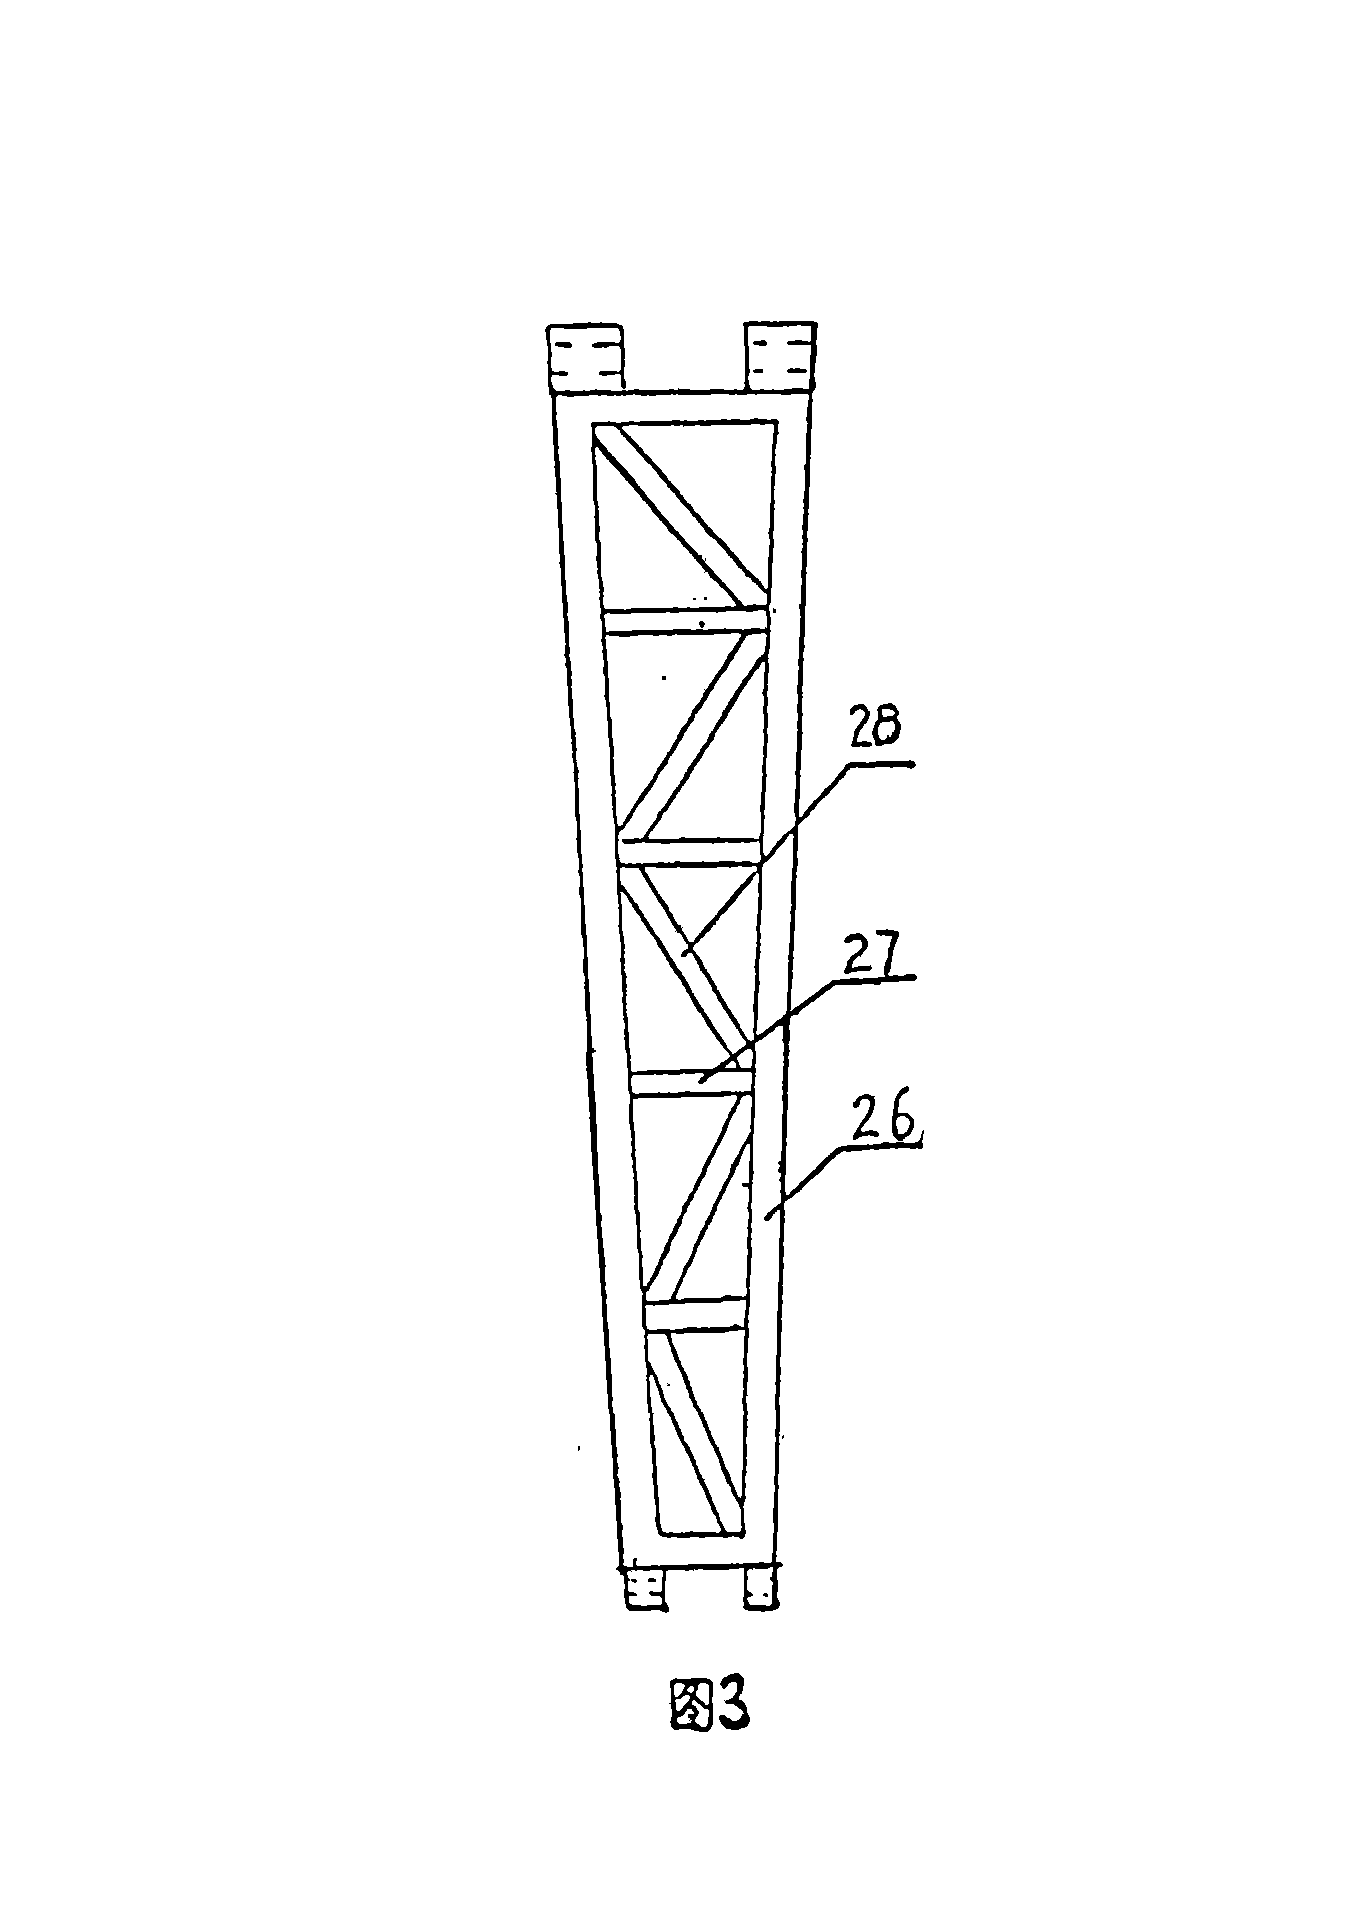 Non-middle-frusta steel gate capable of lodging